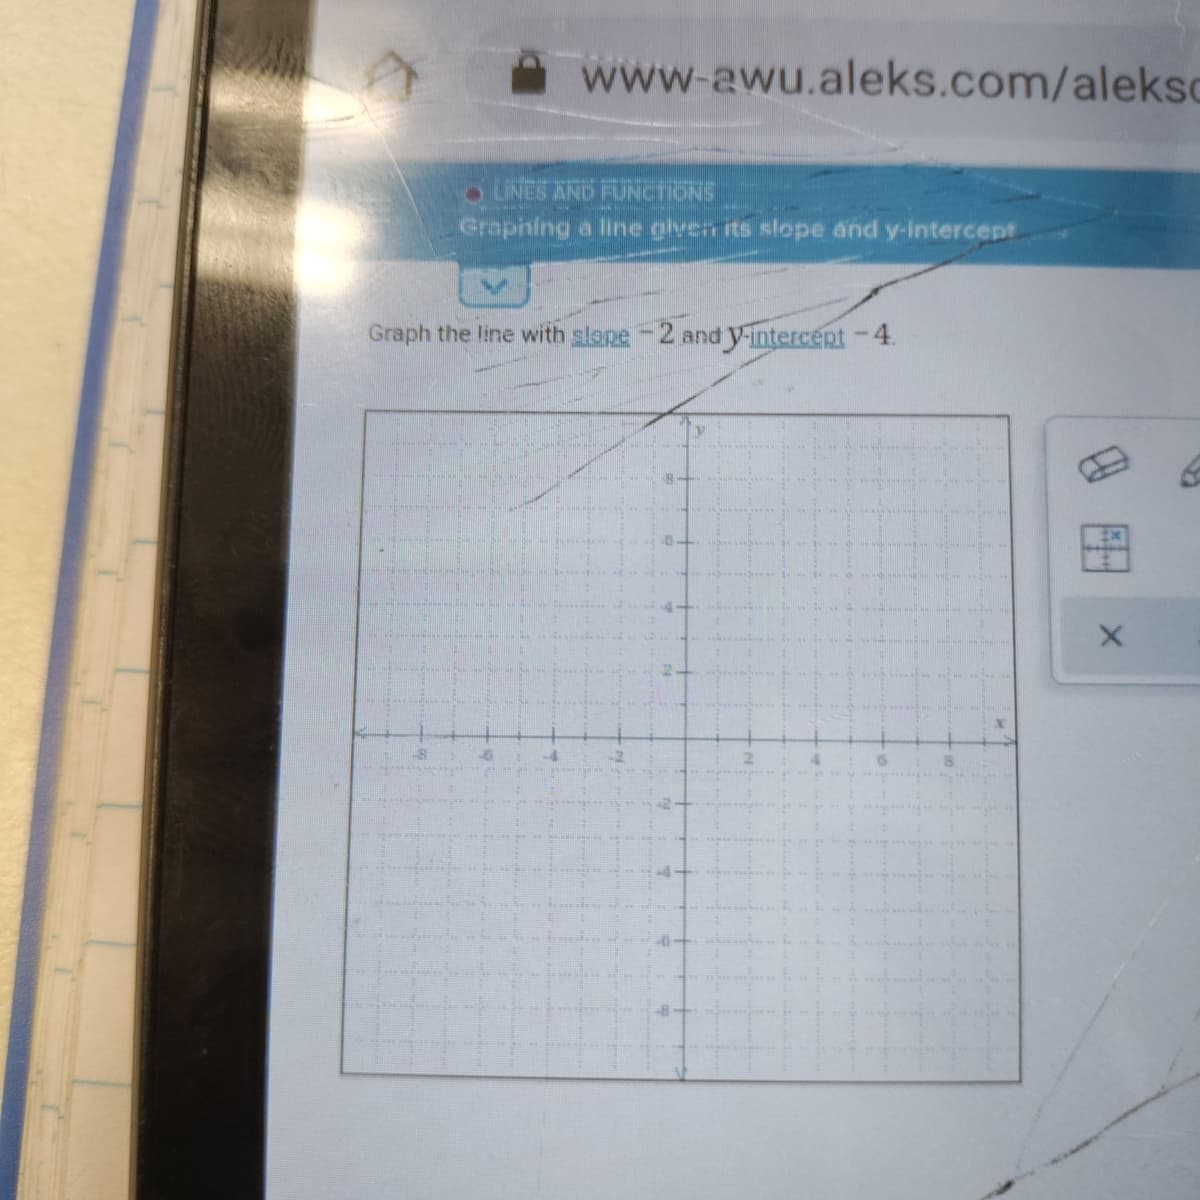 www-awu.aleks.com/aleksc
LINES AND FUNCTIONS
Graphing a line glven its slope and y-intercept
Graph the line with slope -2 and y-intercept-4.
